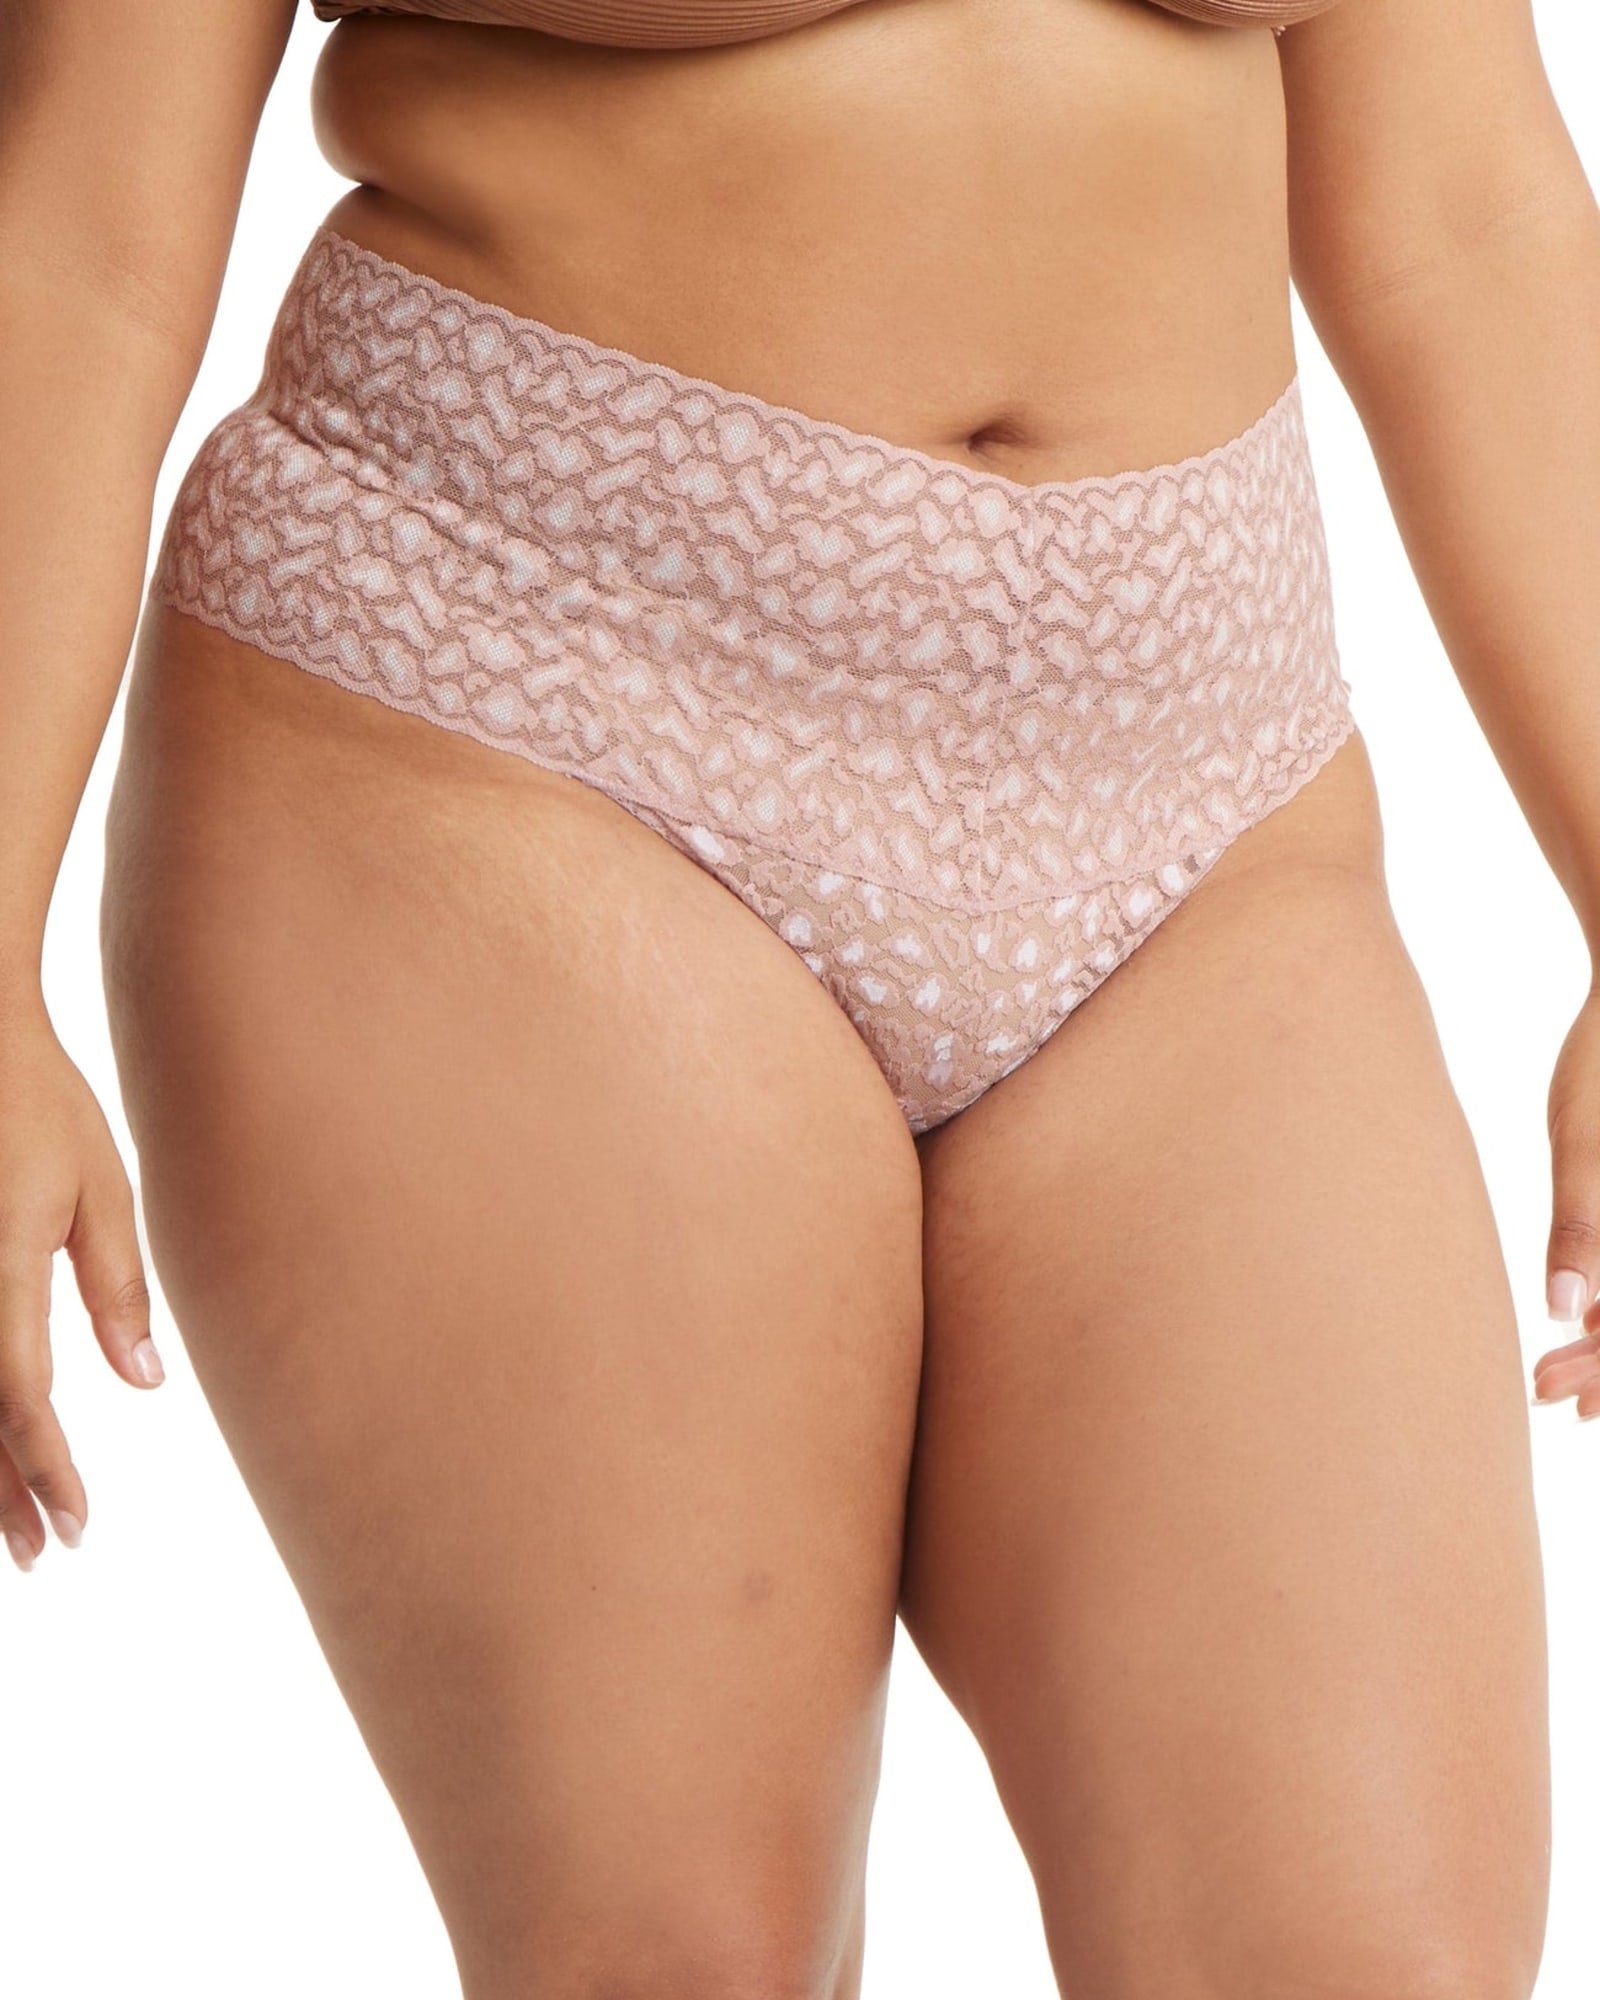 CROSS-DYED LEOPARD RETRO LACE PLUS THONG | DRWH-DESERT ROSE/WHITE